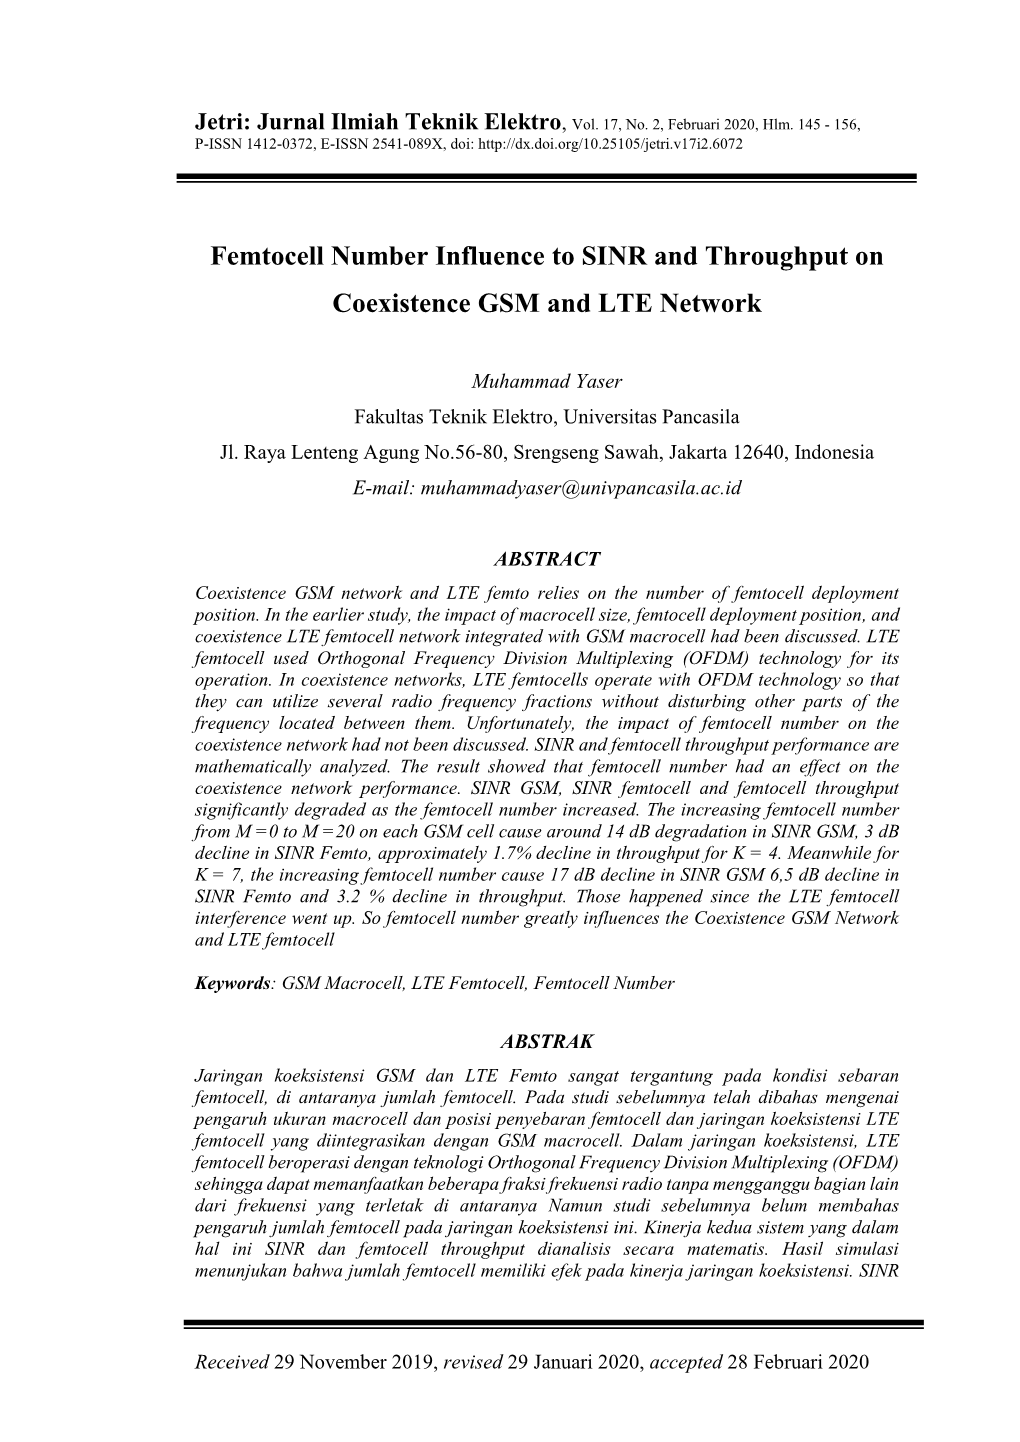 Femtocell Number Influence to SINR and Throughput on Coexistence GSM and LTE Network